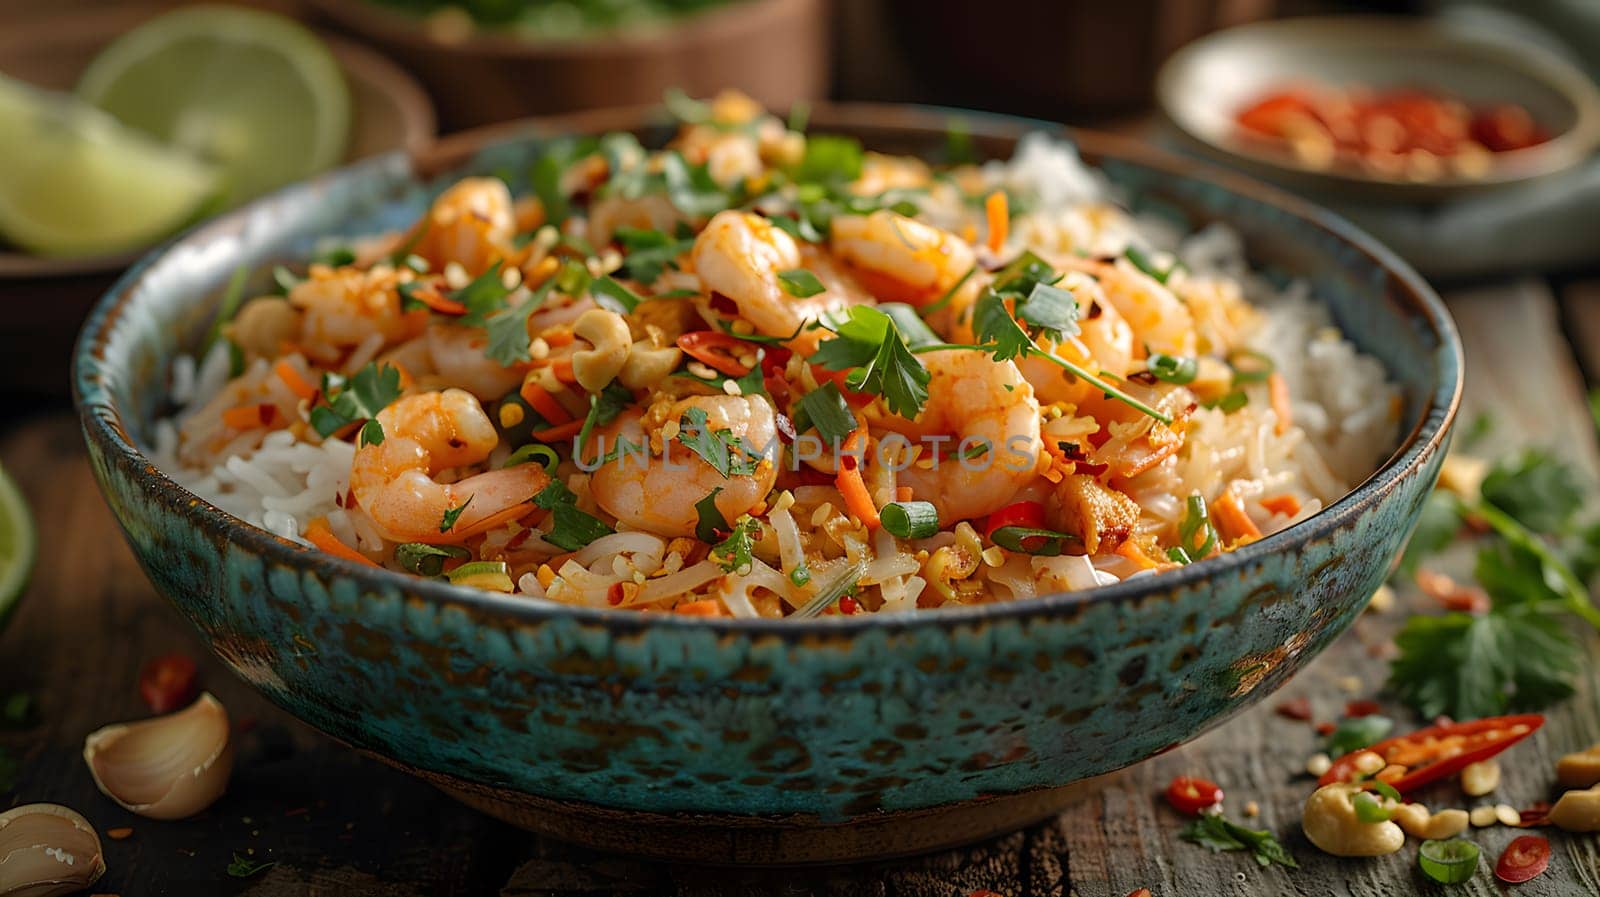 A dish of shrimp and rice served on a wooden table, showcasing the delicious combination of seafood and grains in a flavorful cuisine recipe